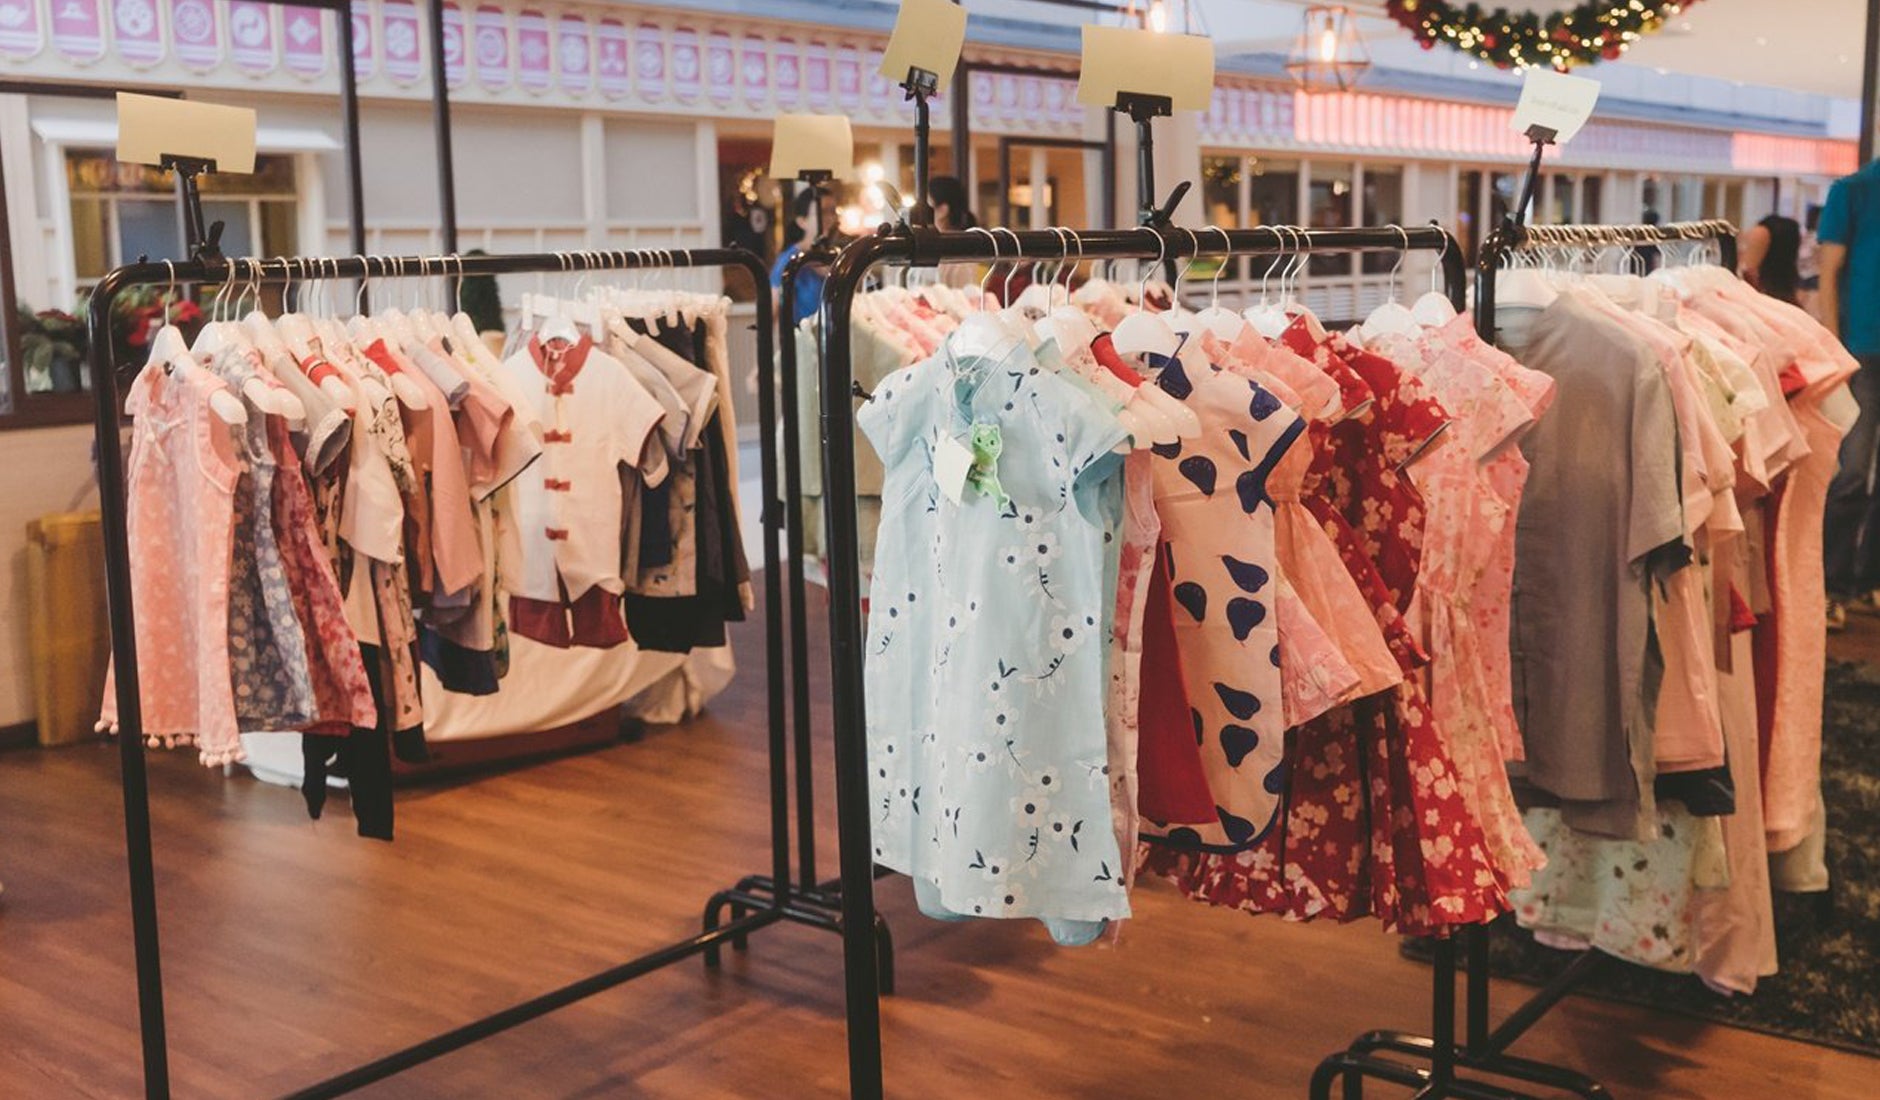 Where to Buy Kids' Clothes & Baby Clothes in Singapore